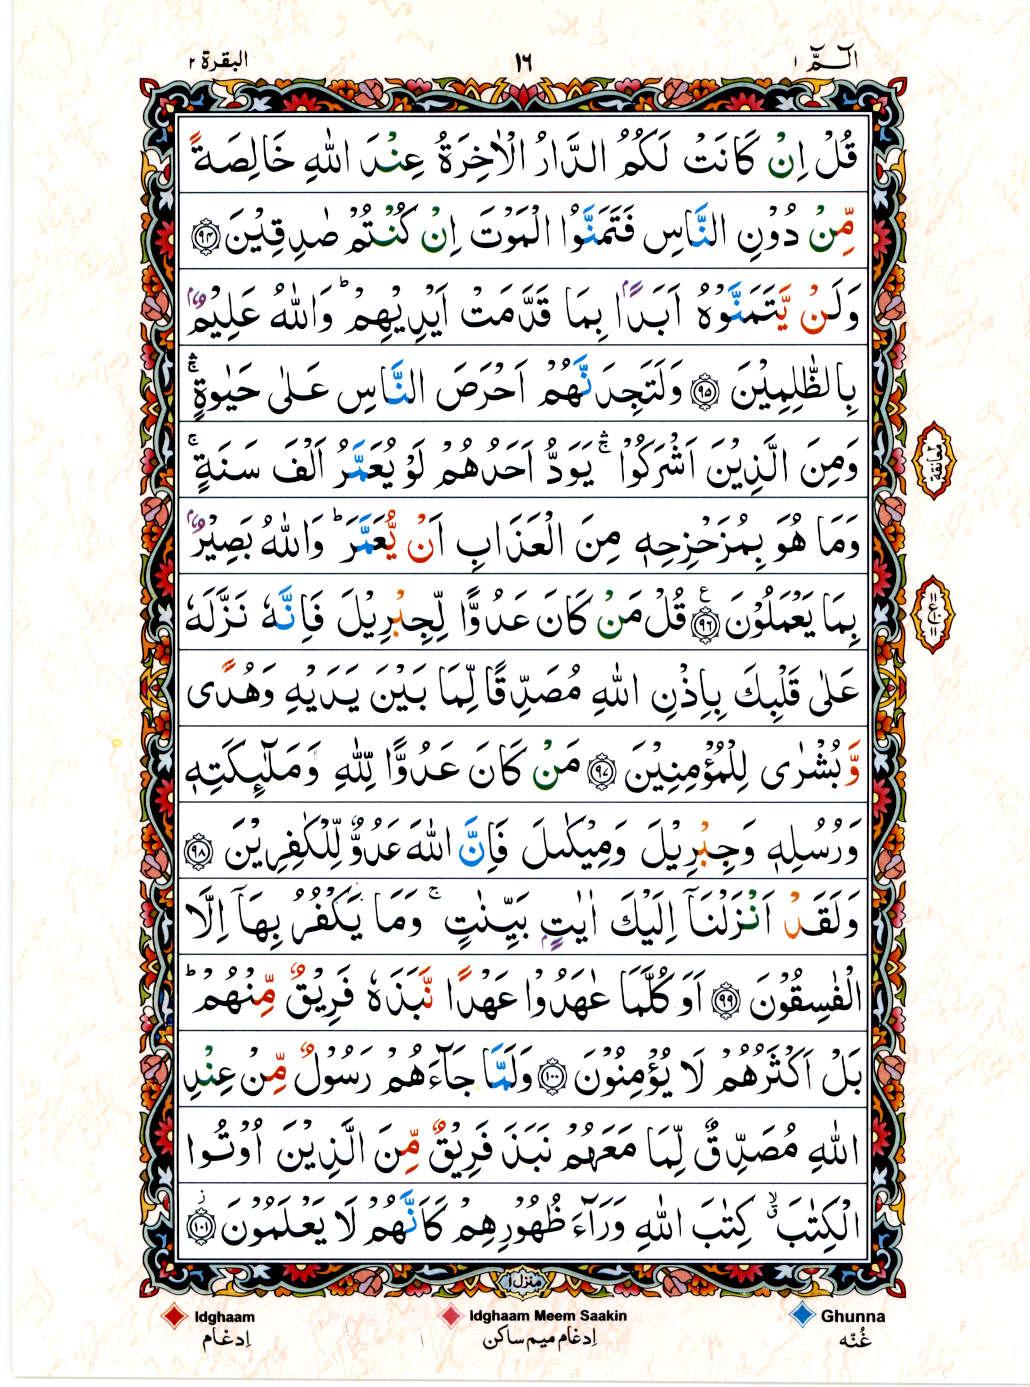 Read 15 Lines Coloured Coded Quran Part 1 Page No 16, Practice Quran